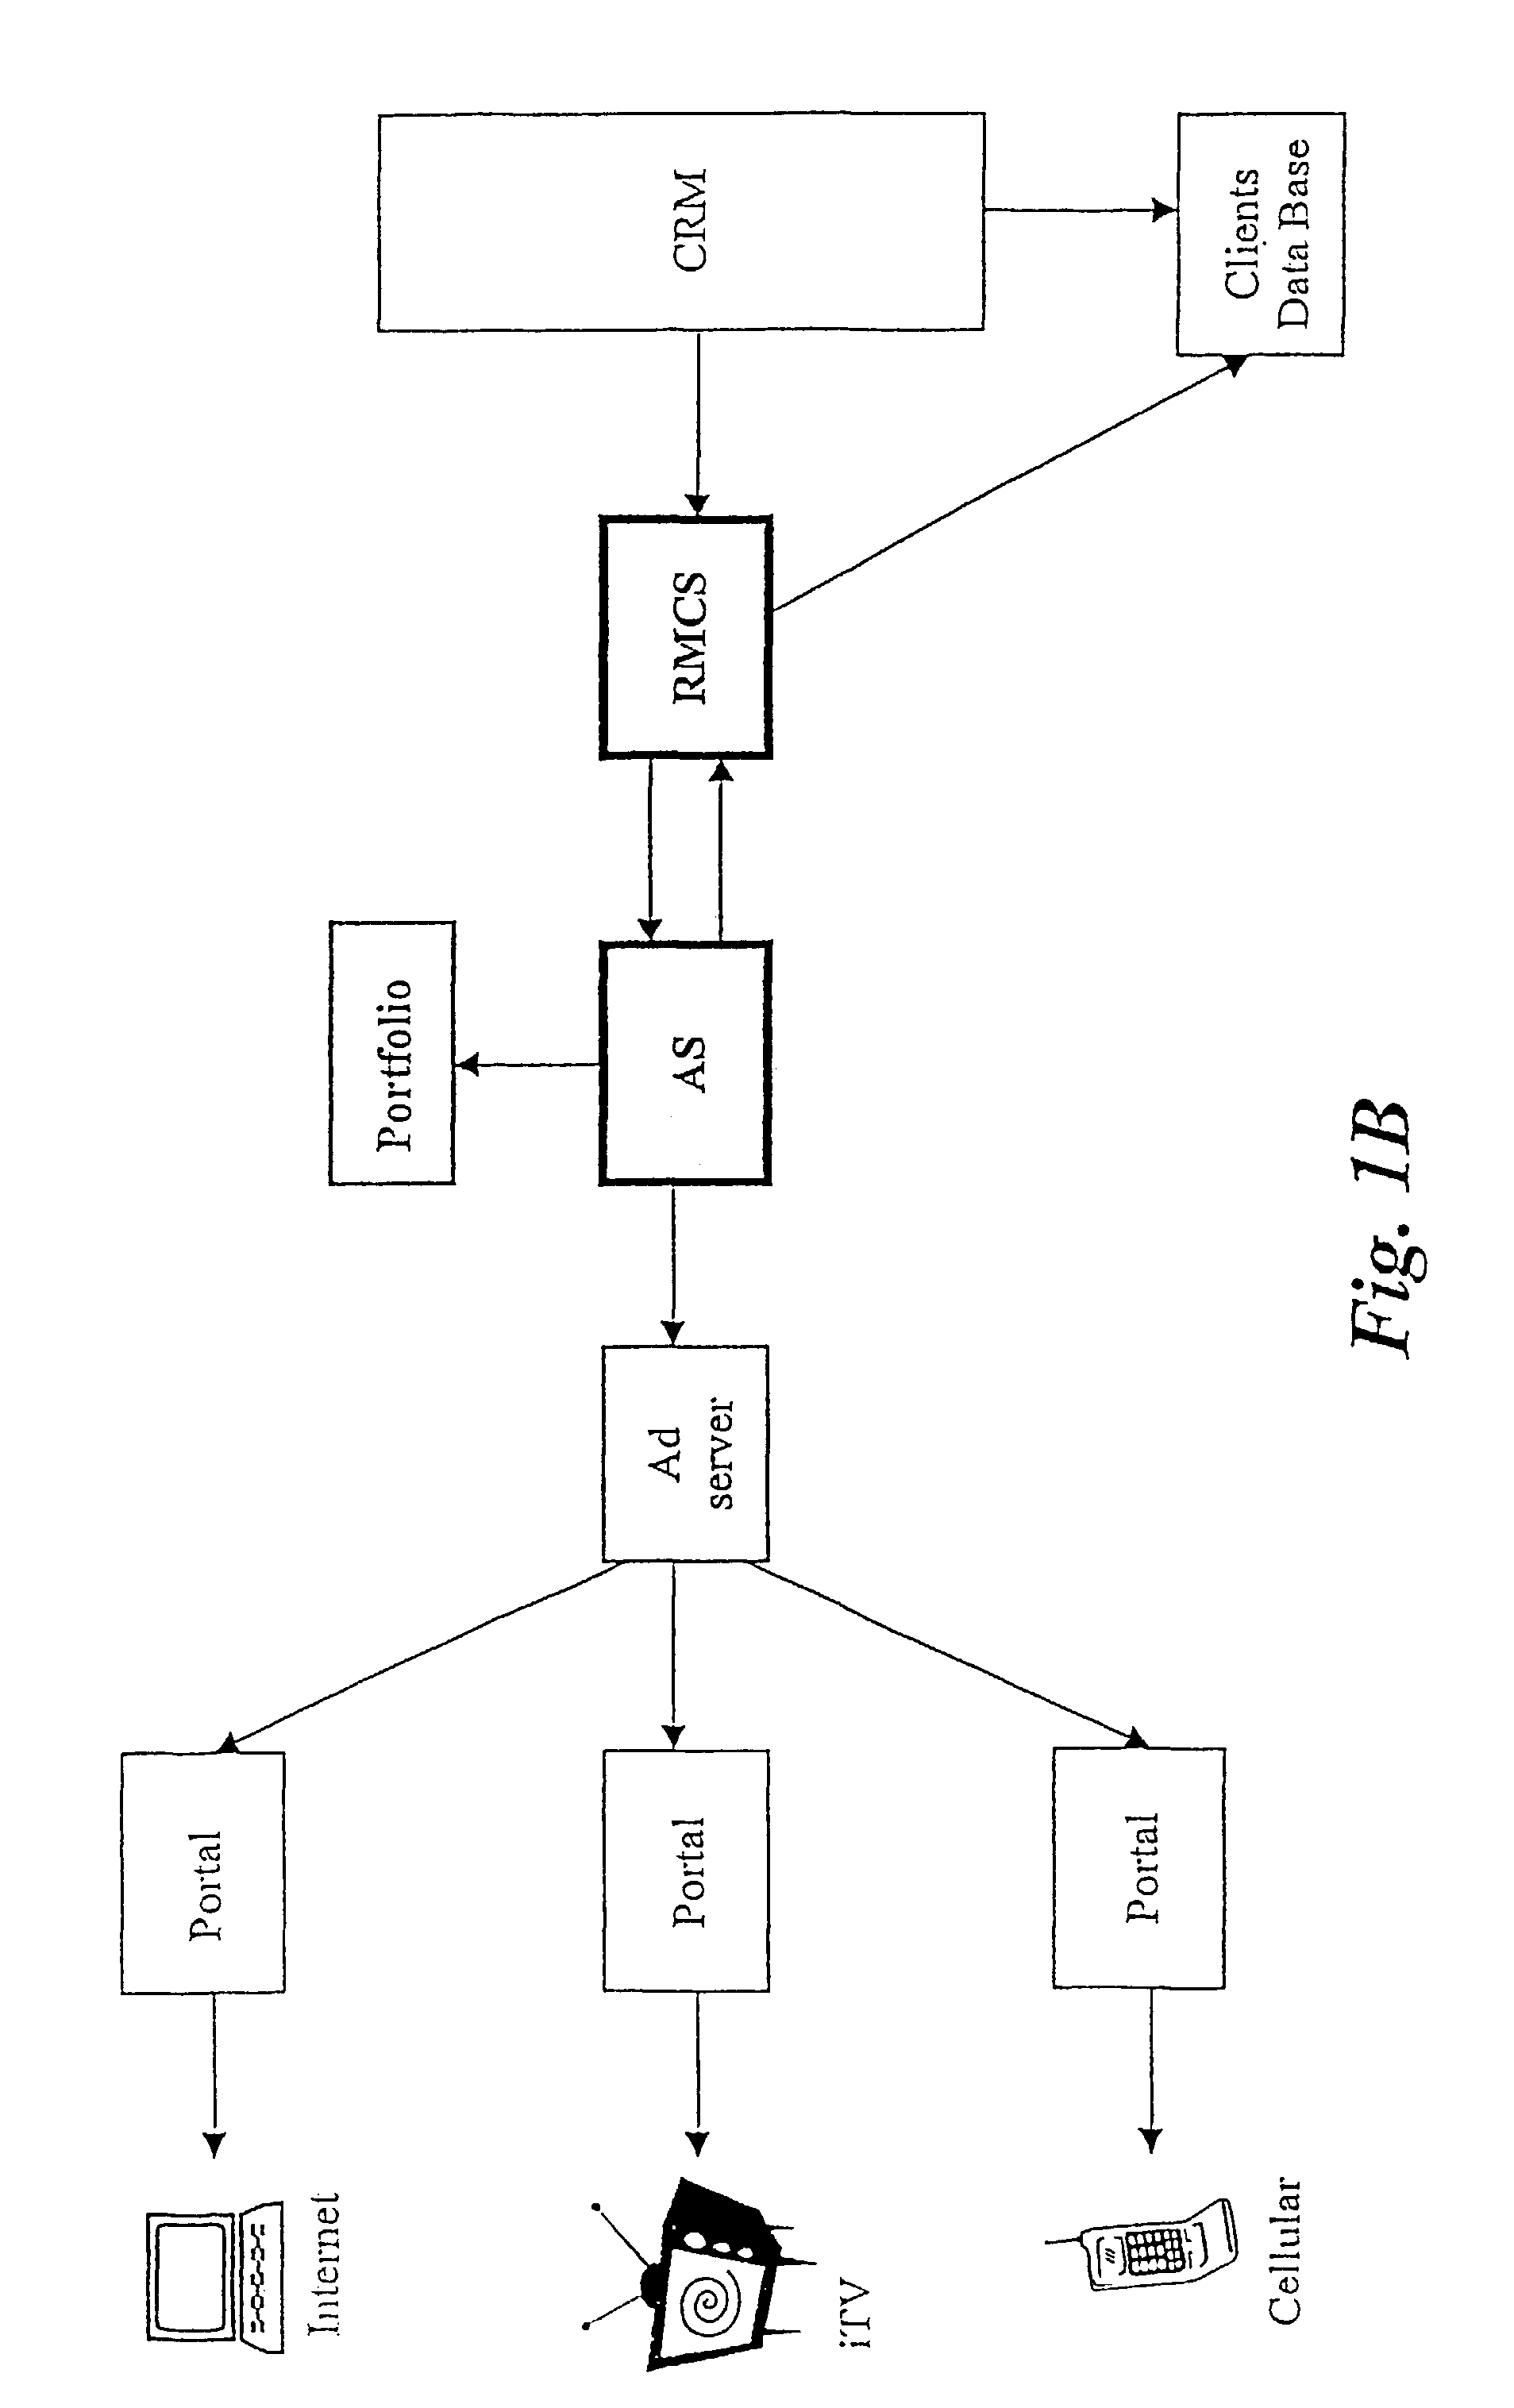 User-driven data network communication system and method